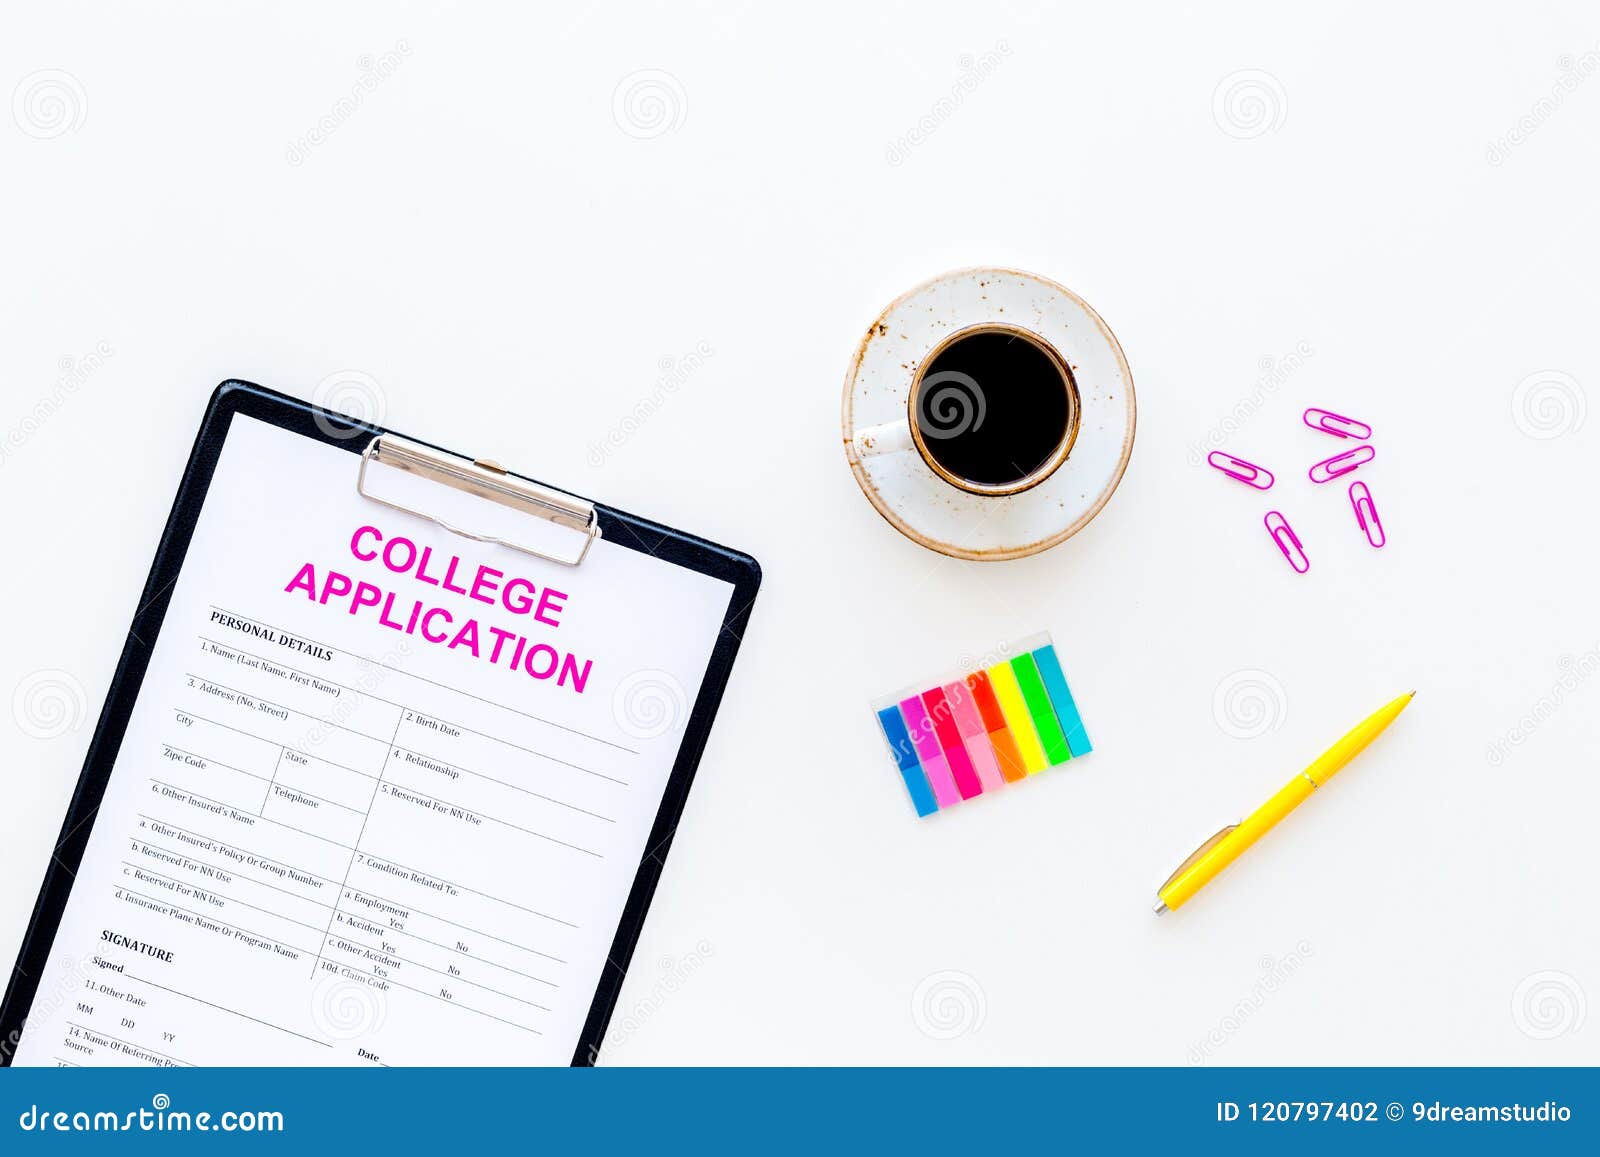 Apply College Empty College Application Form Near Coffee Cup And Stationery On White Background